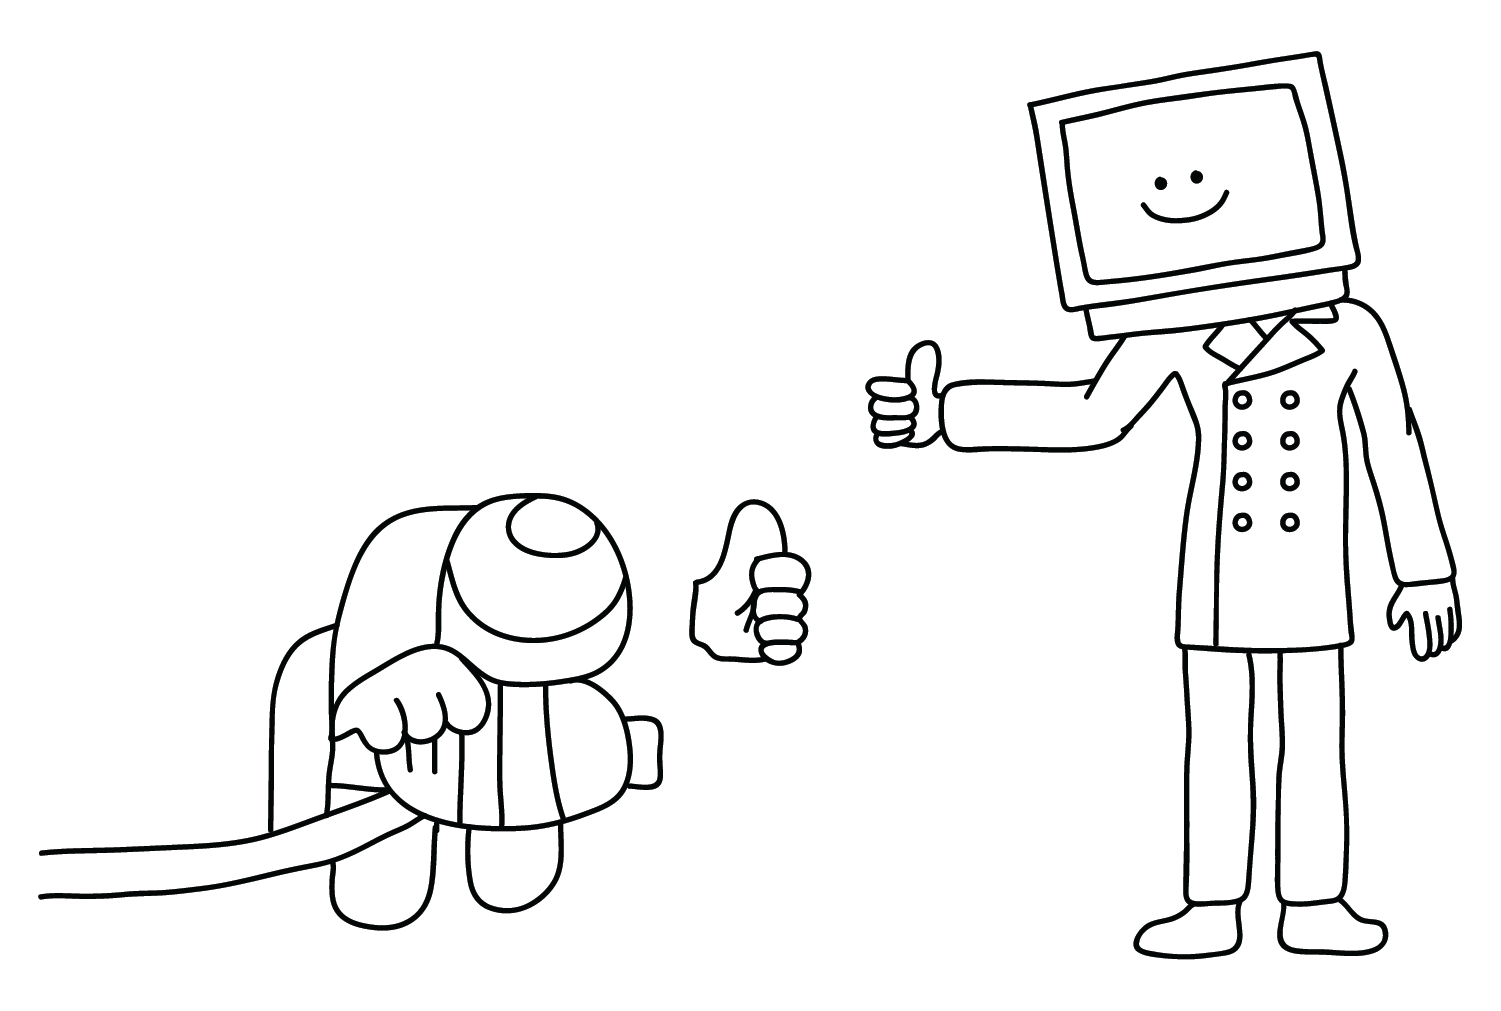 TV Man Image to Color from TV Man